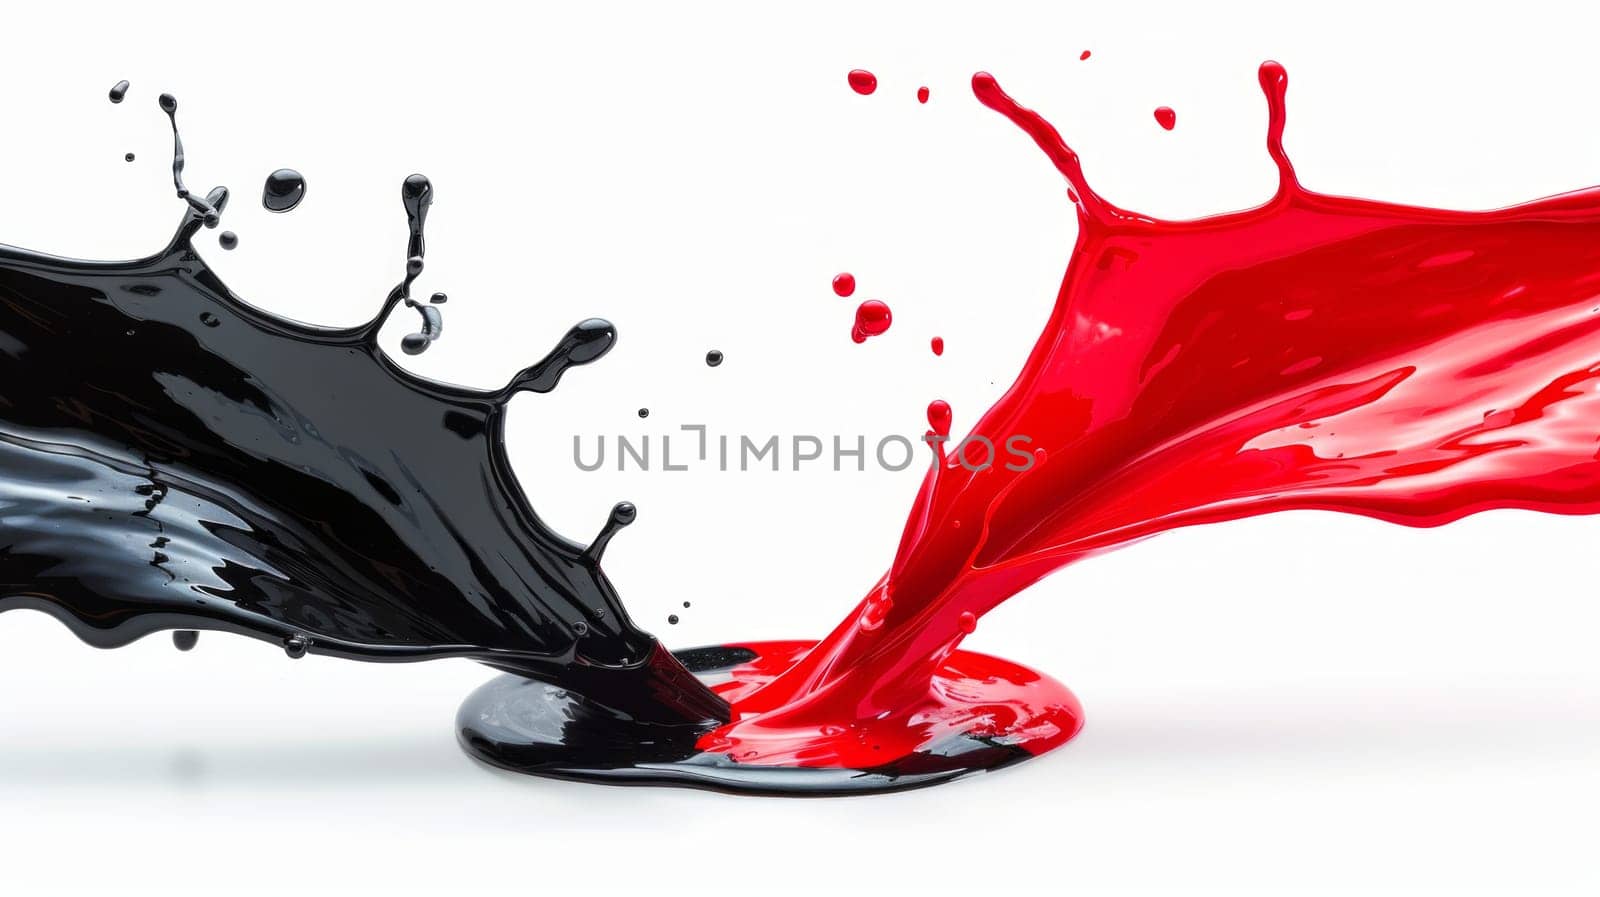 A vivid red liquid collides with a deep black liquid, creating a dramatic and mesmerizing splash in the background paint.